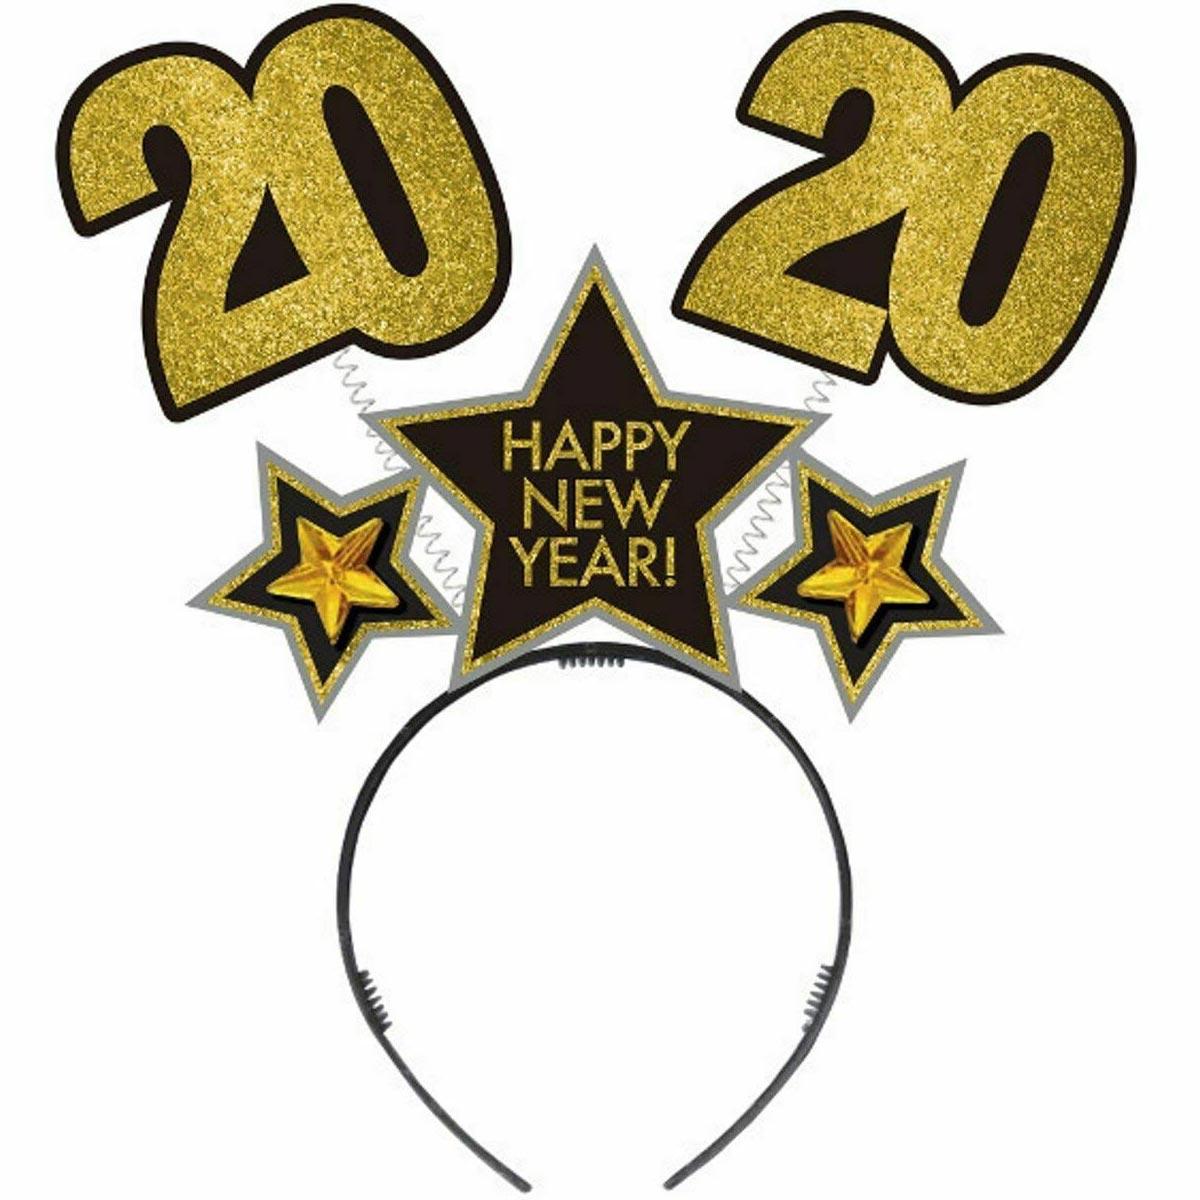 2020 New Year's Carboard Bopper Costumes & Apparel - Party Centre